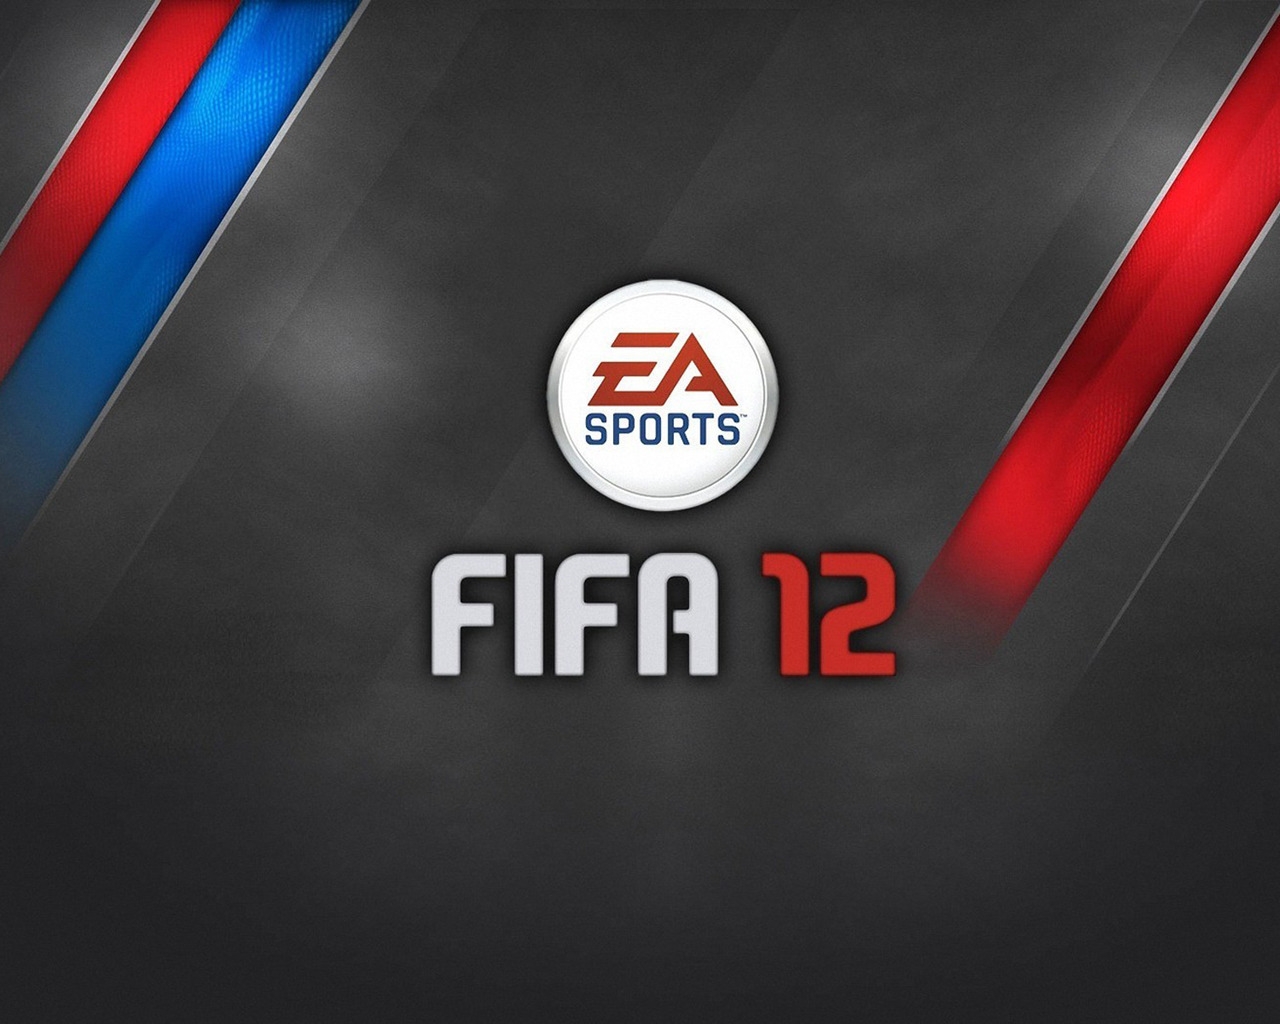 FIFA 12 for 1280 x 1024 resolution